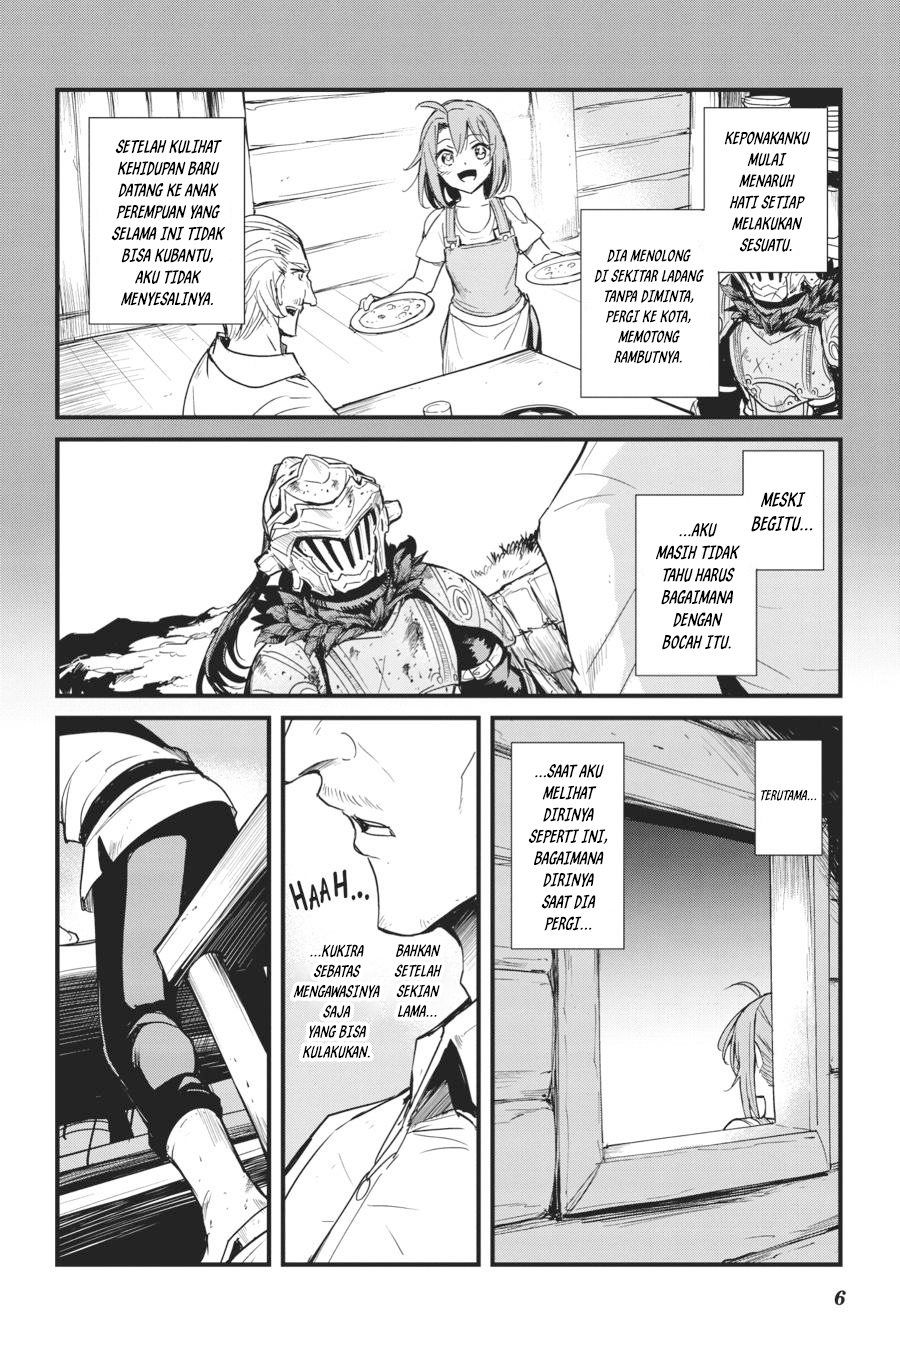 Goblin Slayer Side Story: Year One Chapter 57